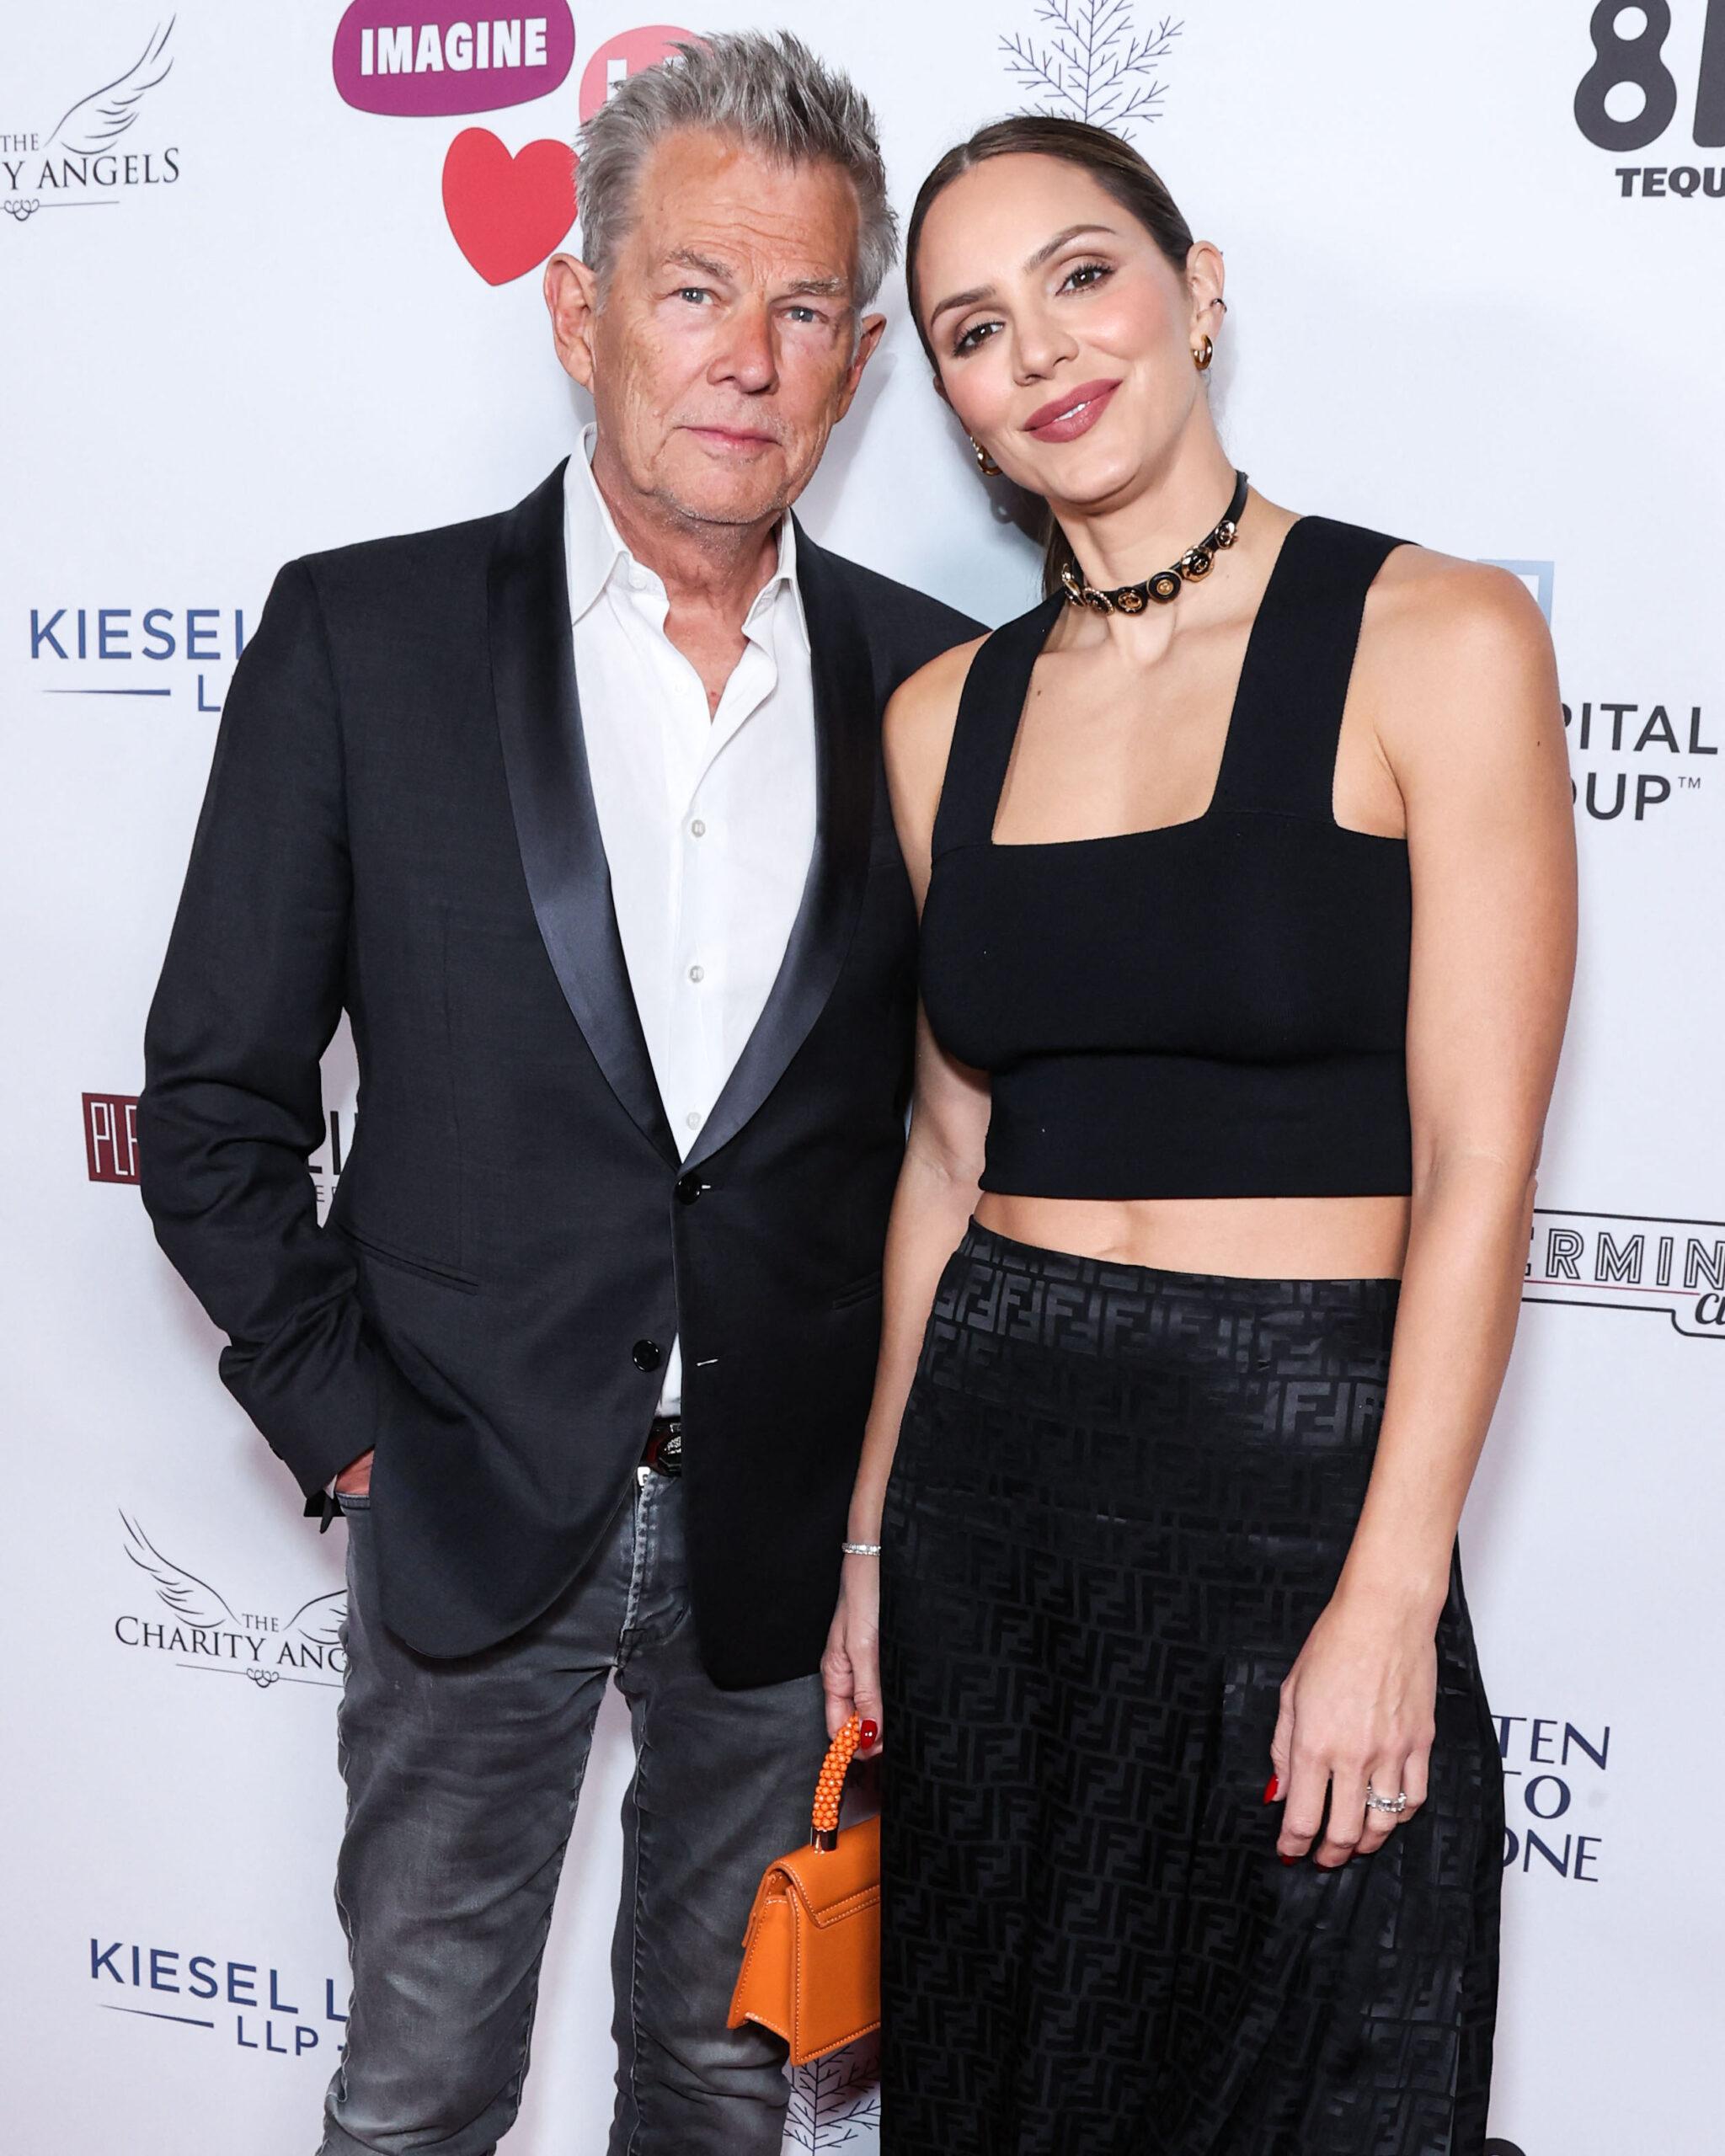 David Foster and Katharine McPhee at the 7th Annual Imagine Ball